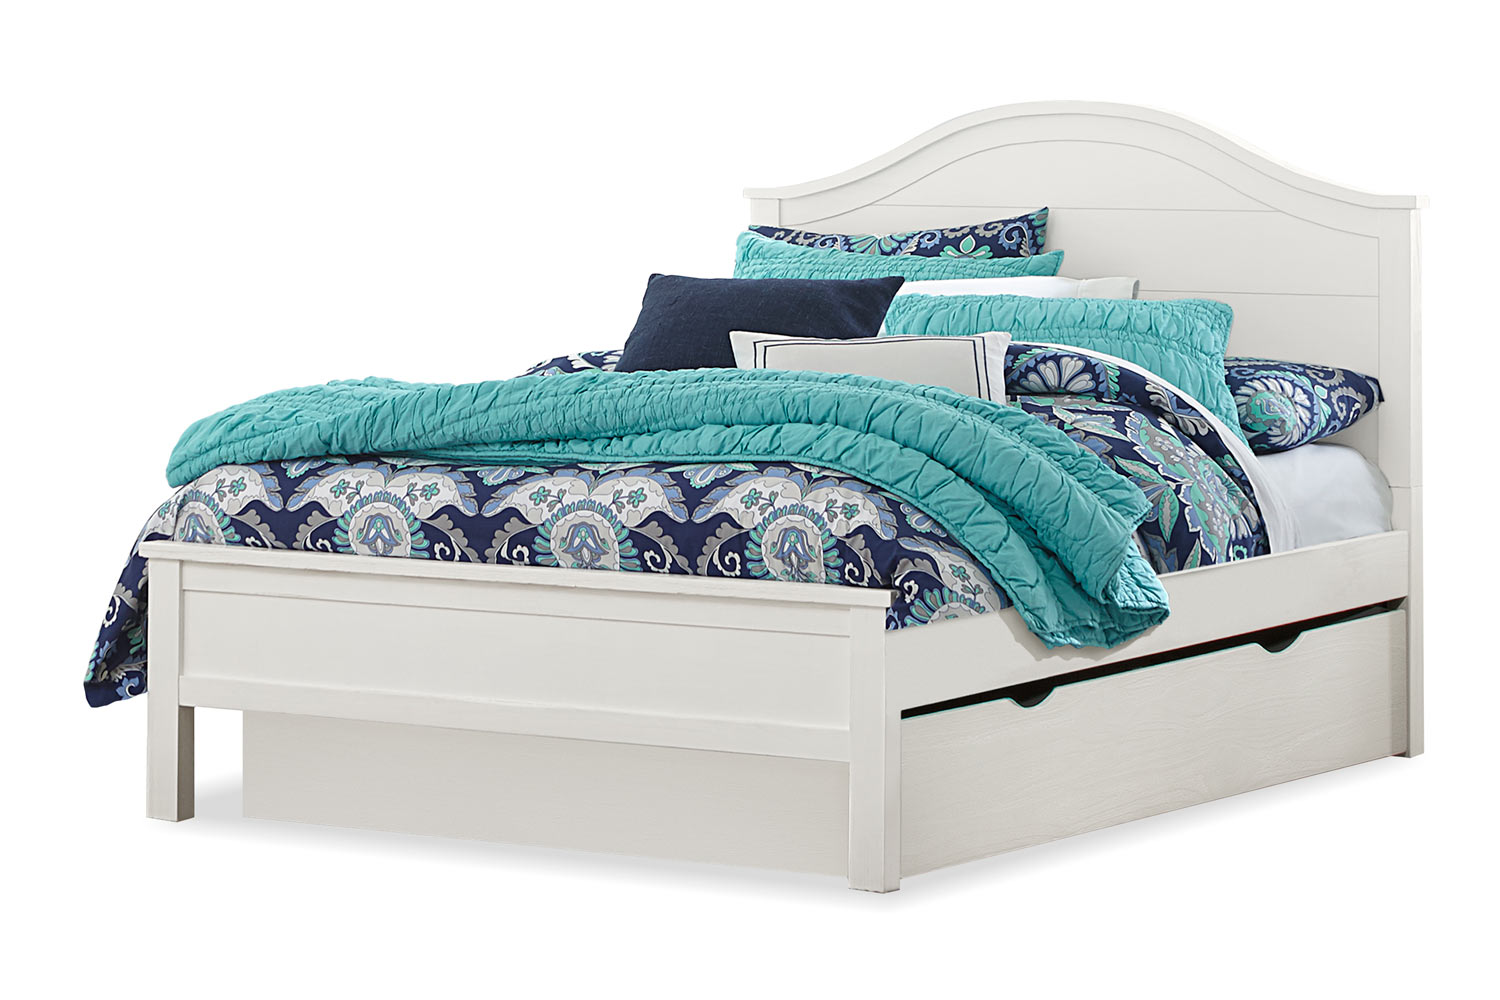 NE Kids Highlands Bailey Arch Bed with Trundle - White